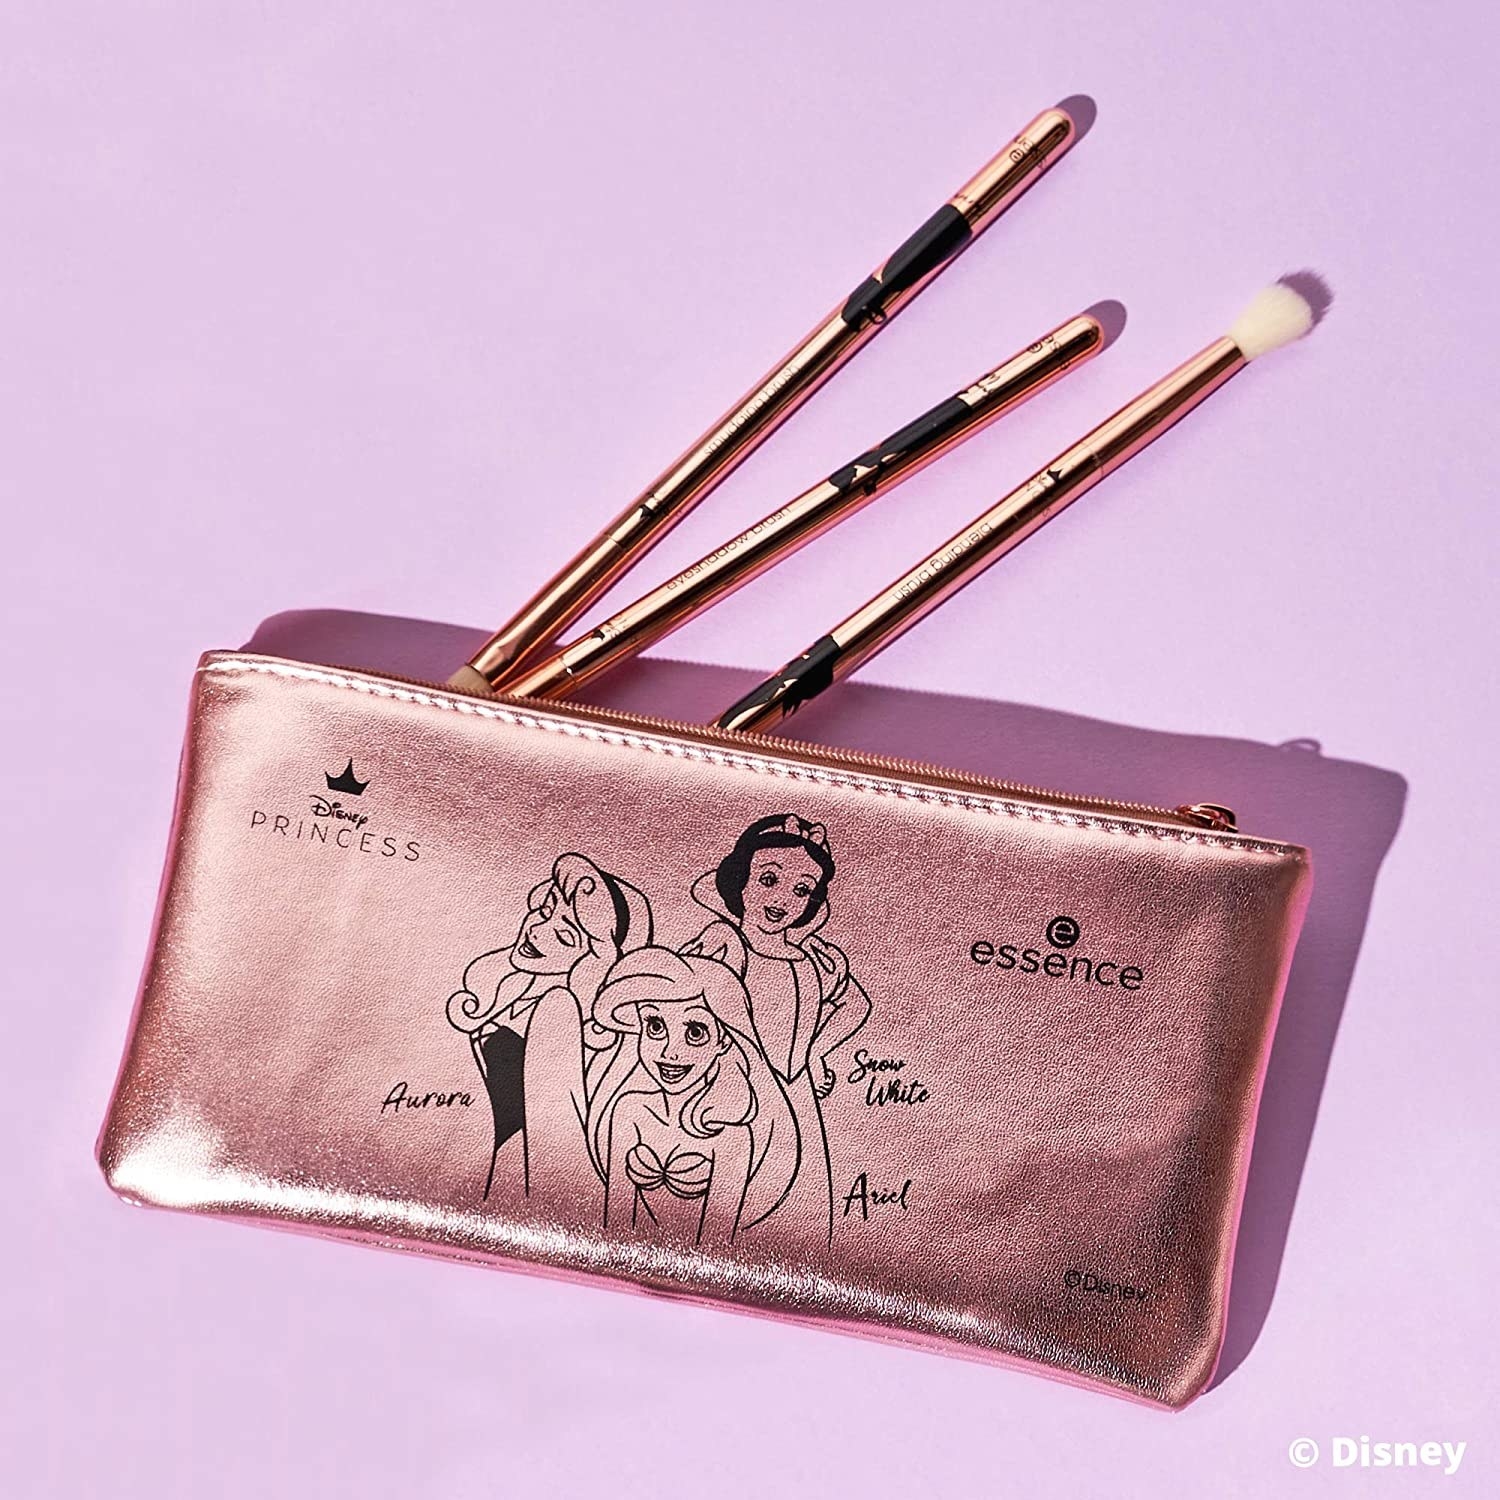 Disney Princess Essence makeup pouch with three brushes and graphics featuring Ariel, Snow White, and Aurora